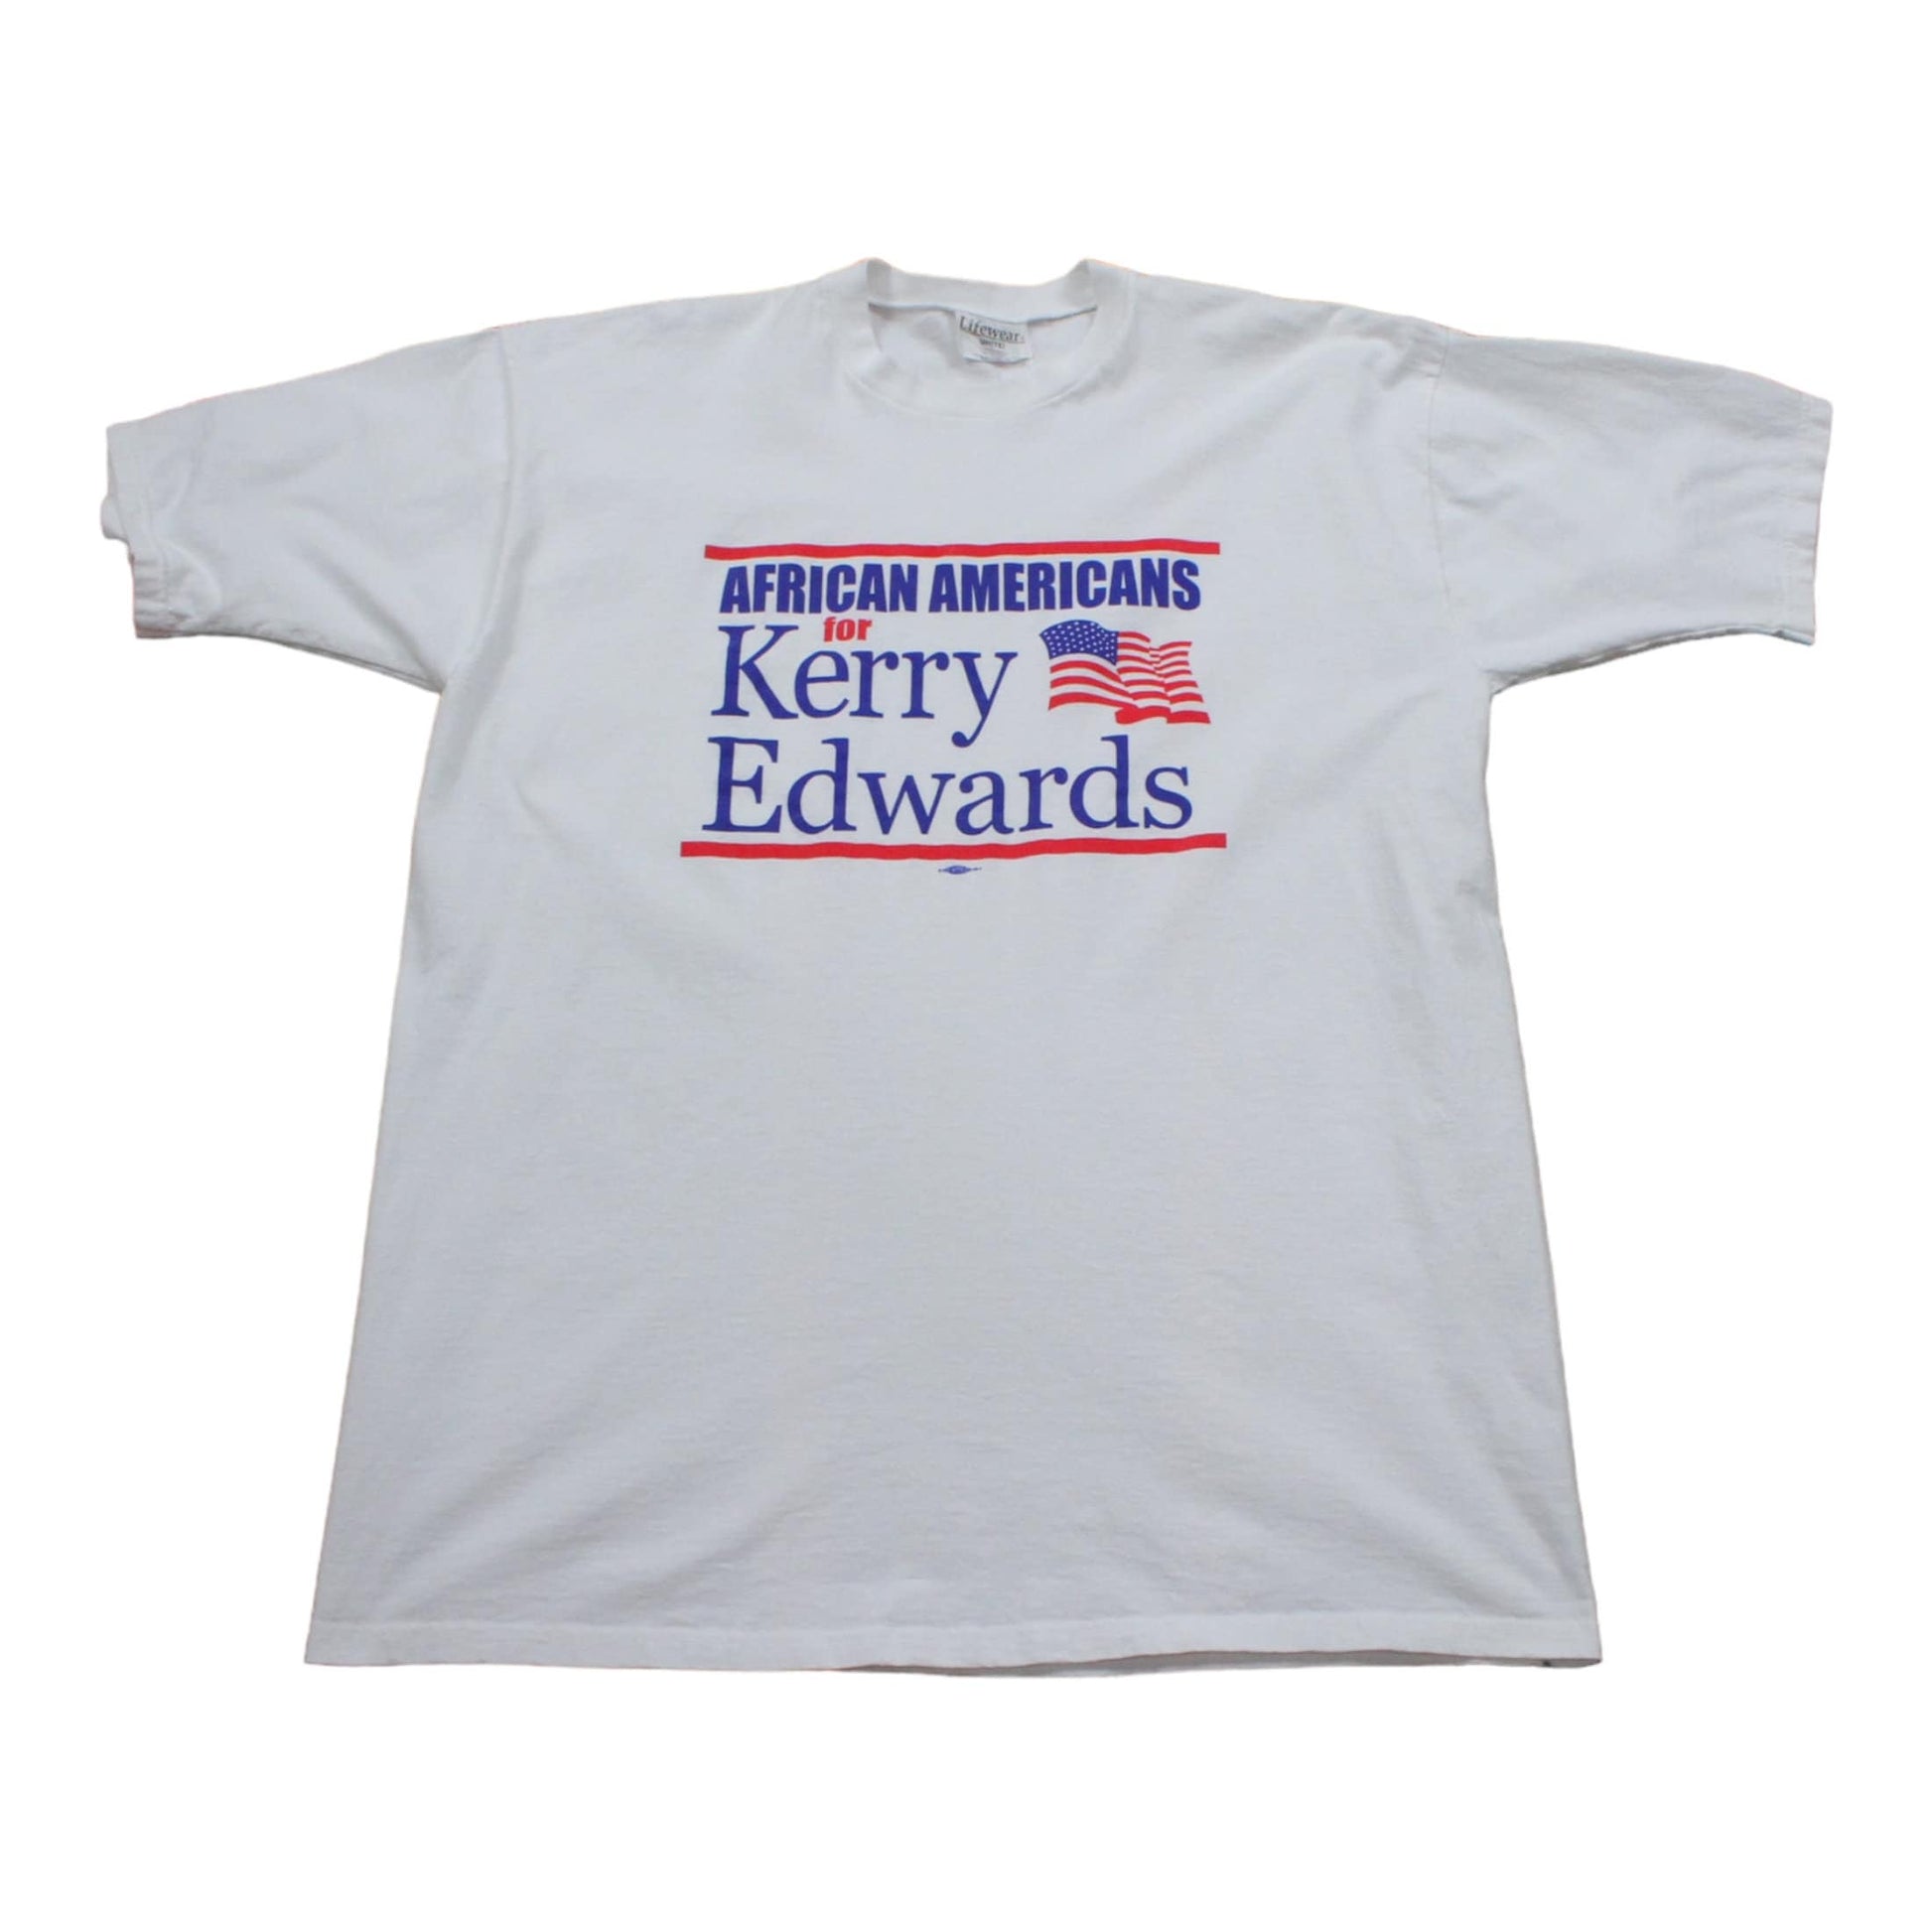 2000s 2004 African Americans for Kerry Edwards Campaign T-Shirt Made in USA Size XL